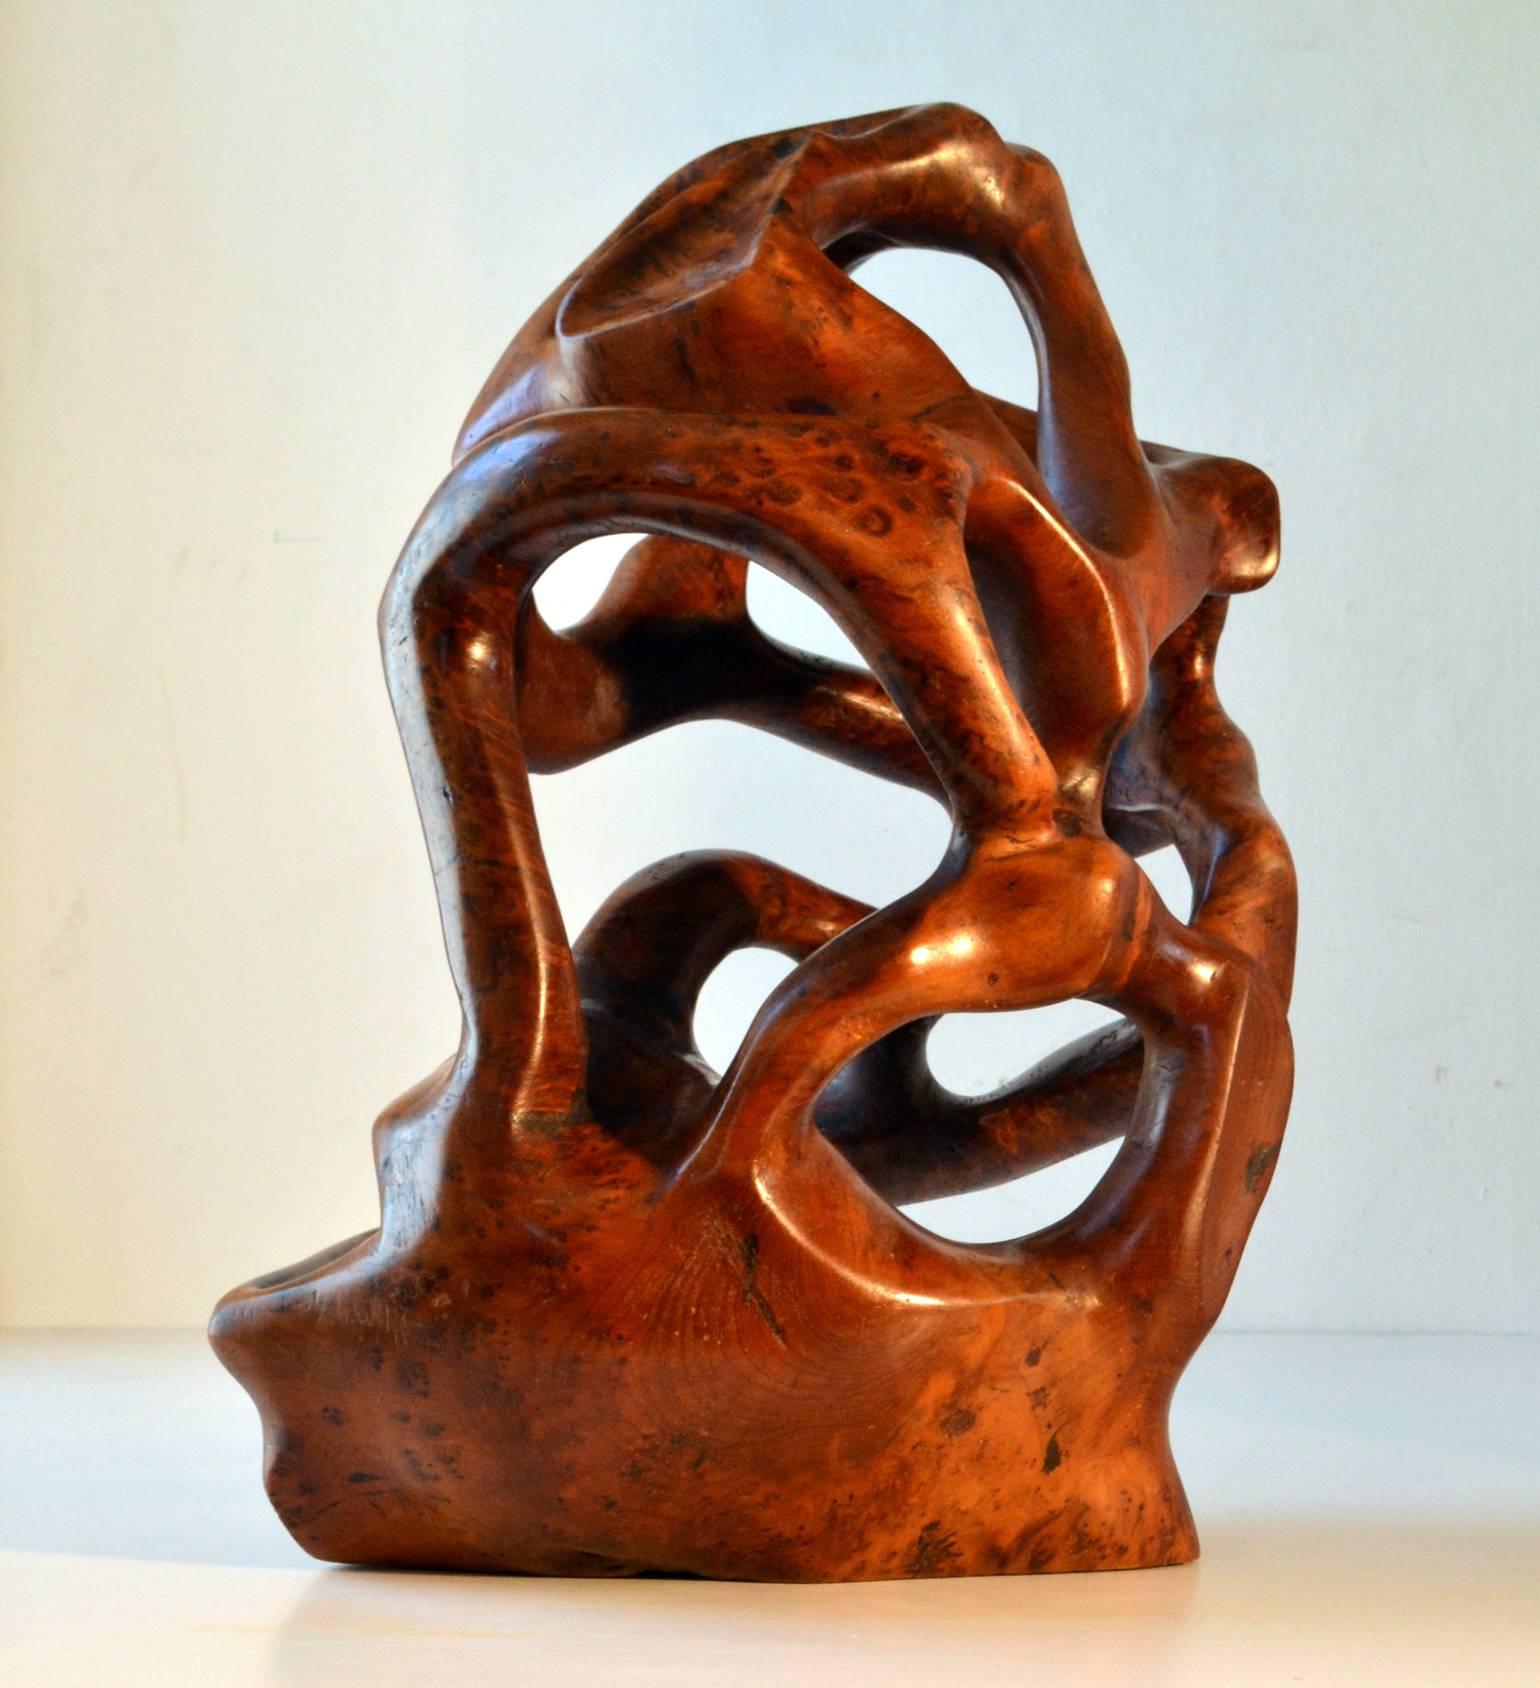 This large free-form organic wooden sculpture is carved from Yew with its twisting curves colliding all angles. It has a slippery burned orange surface.
Yew trees are some of the oldest trees in the world. It is grown in many exotic shapes which